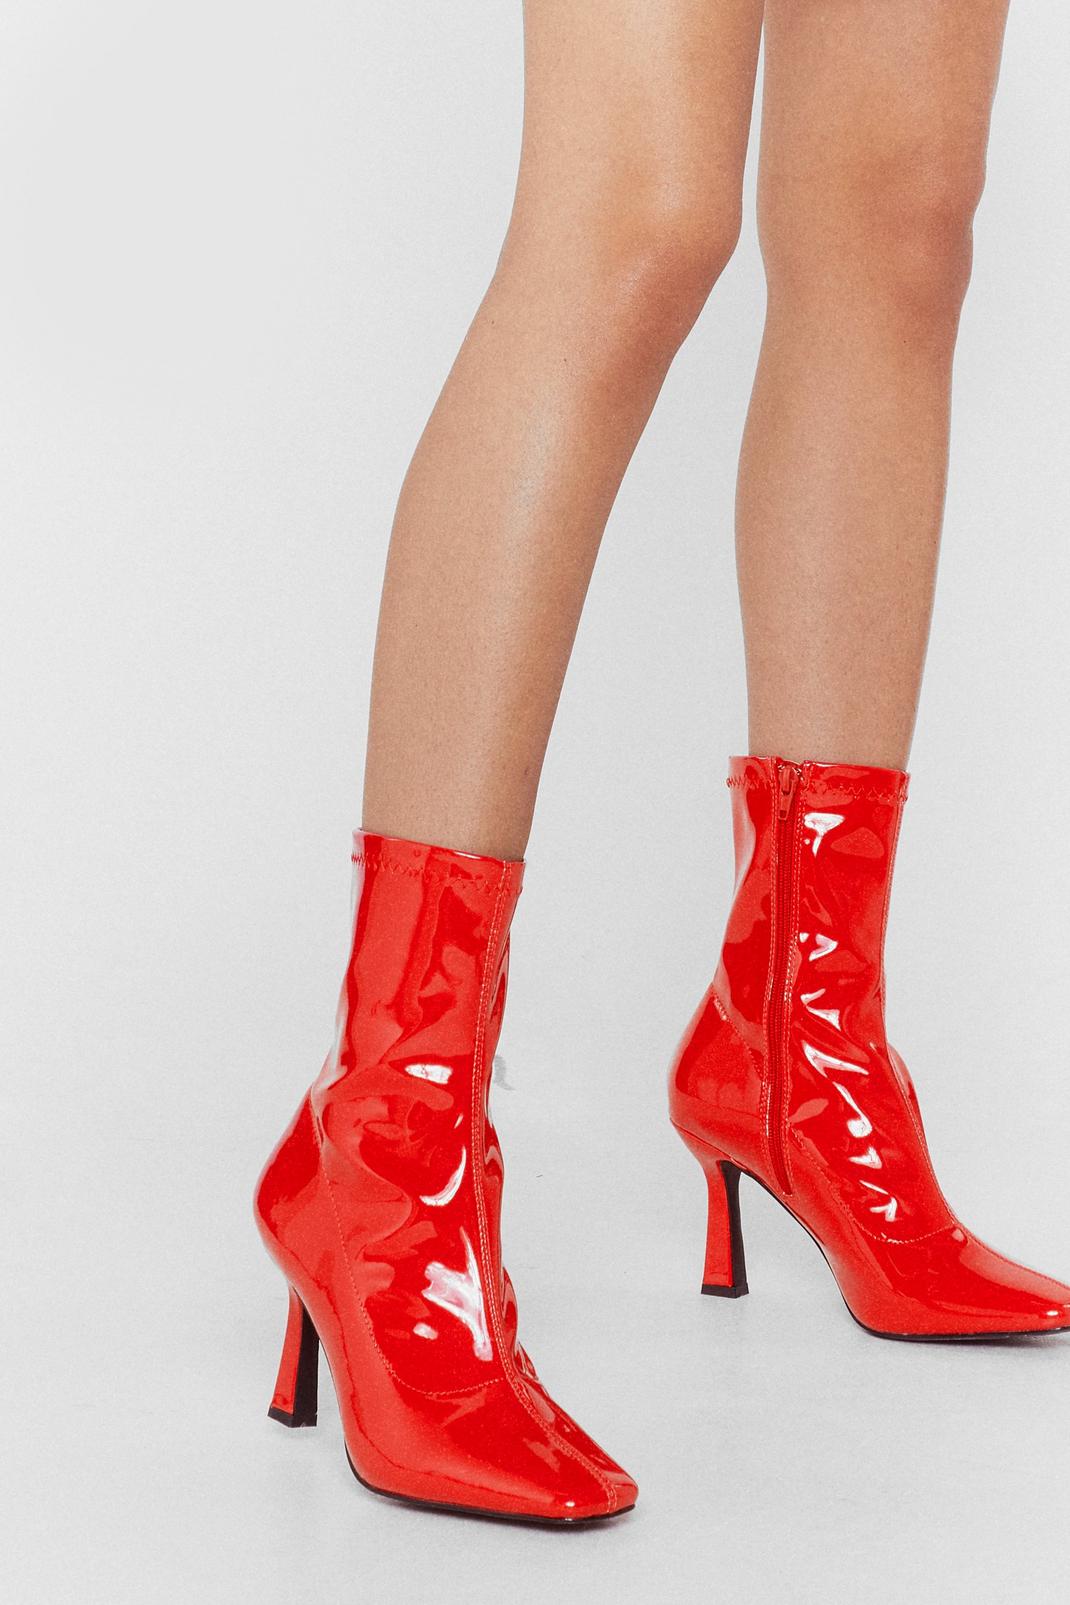 Patent Faux Leather Stiletto Sock Boots | Nasty Gal